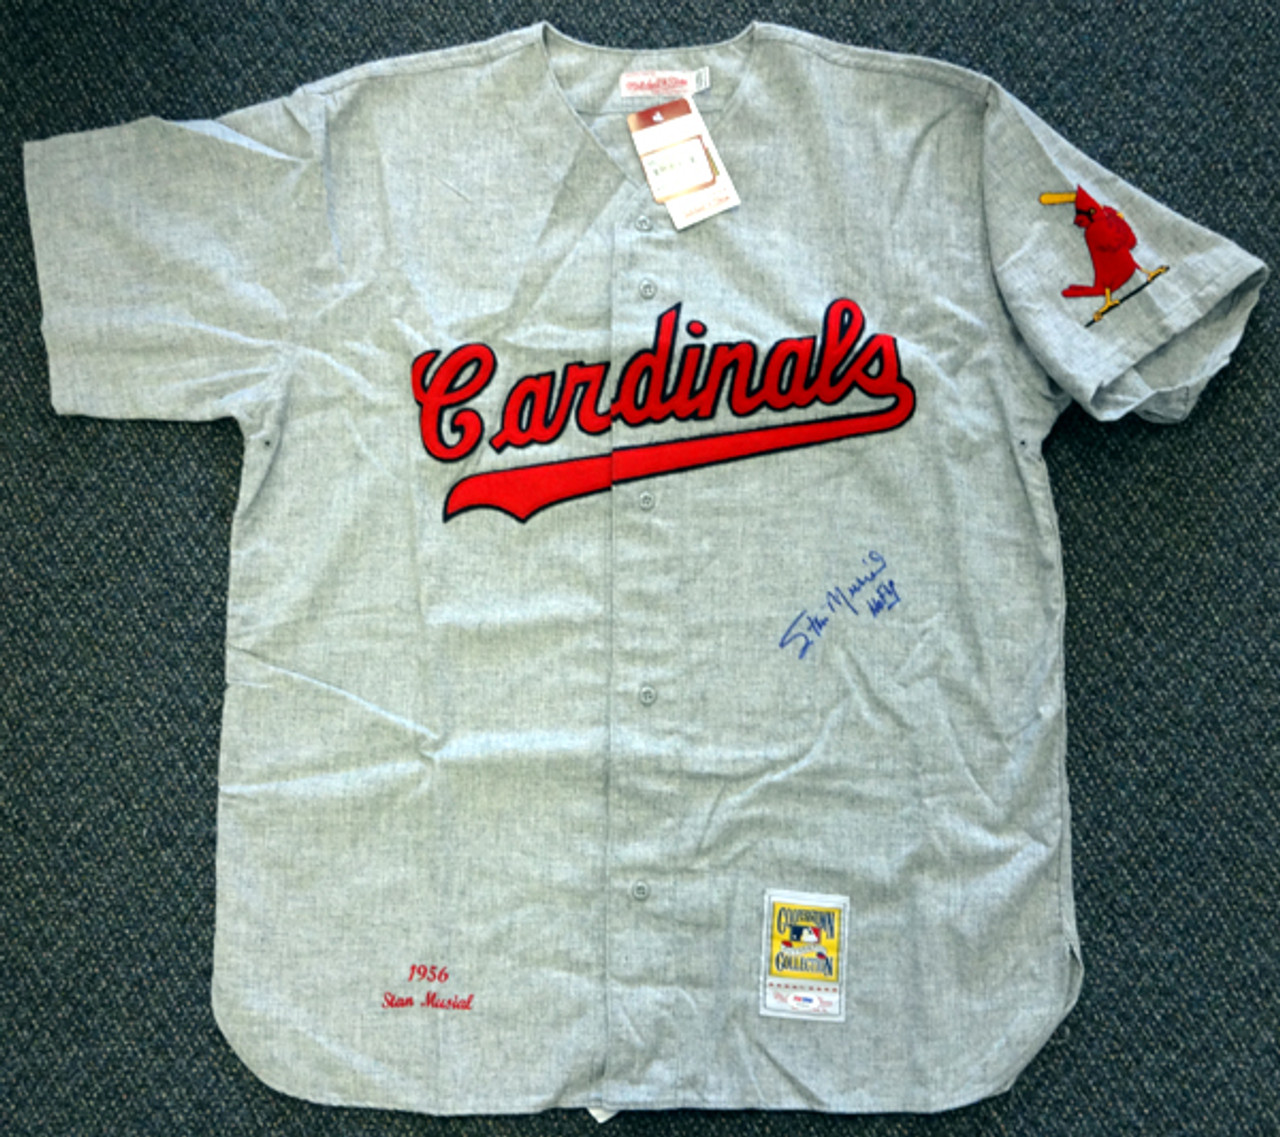 Stan Musial Signed Cardinals Jersey Mitchell Ness | The Sports Gallery